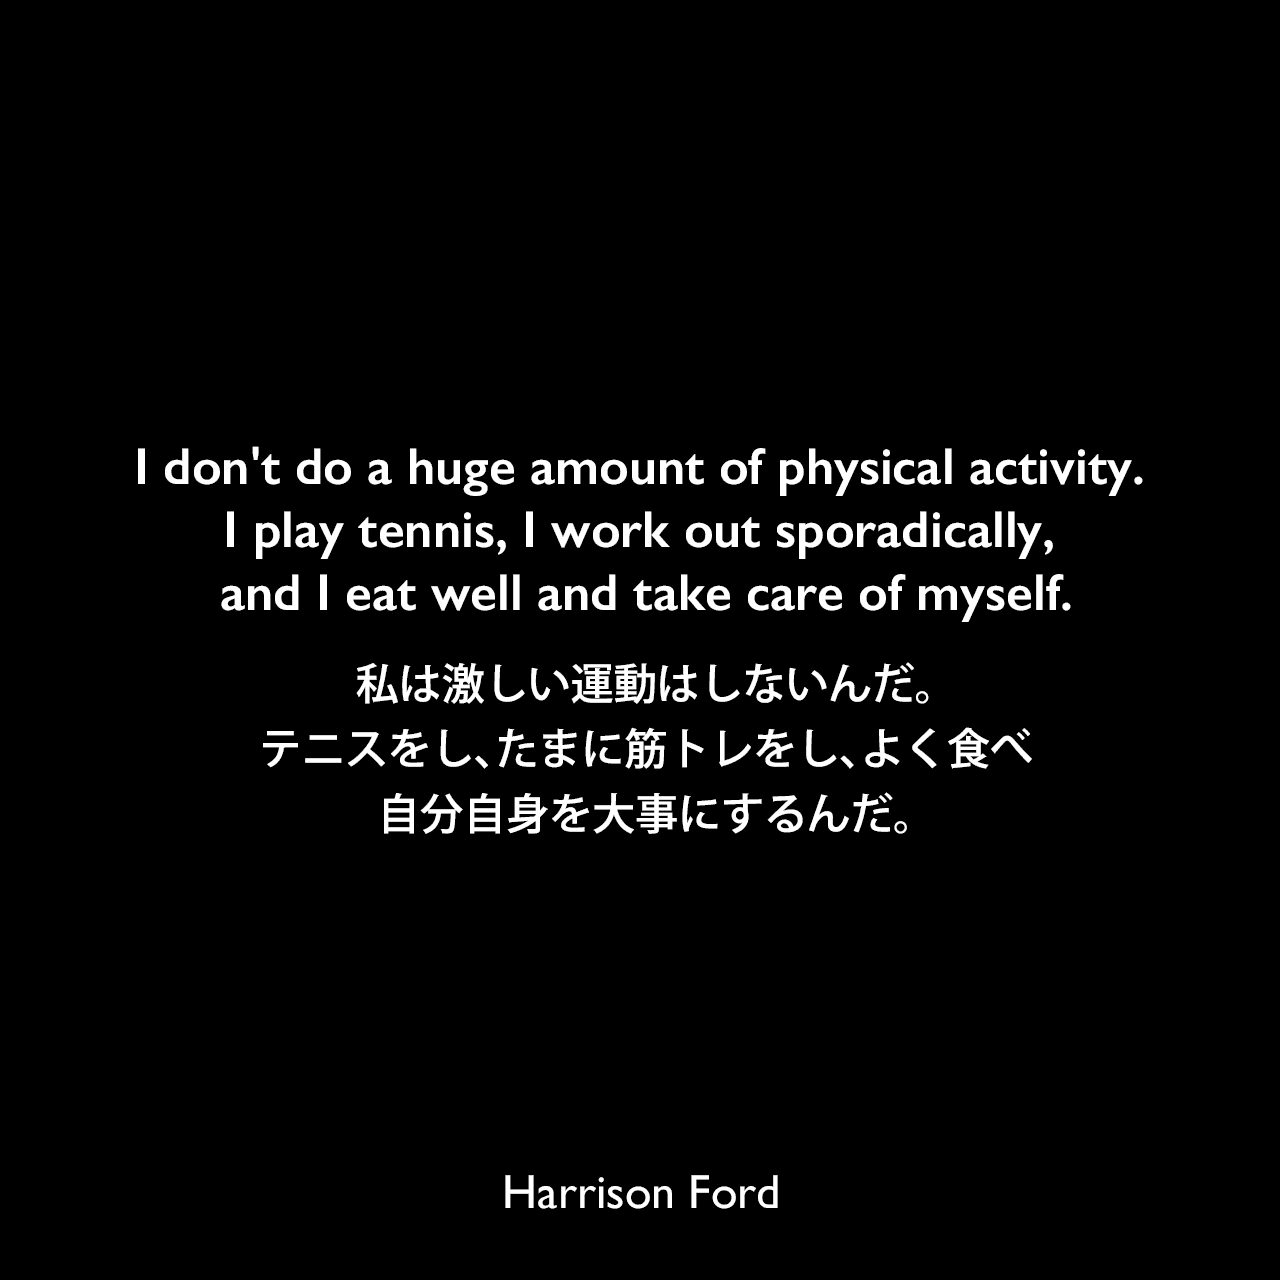 I don't do a huge amount of physical activity. I play tennis, I work out sporadically, and I eat well and take care of myself.私は激しい運動はしないんだ。テニスをし、たまに筋トレをし、よく食べ、自分自身を大事にするんだ。Harrison Ford